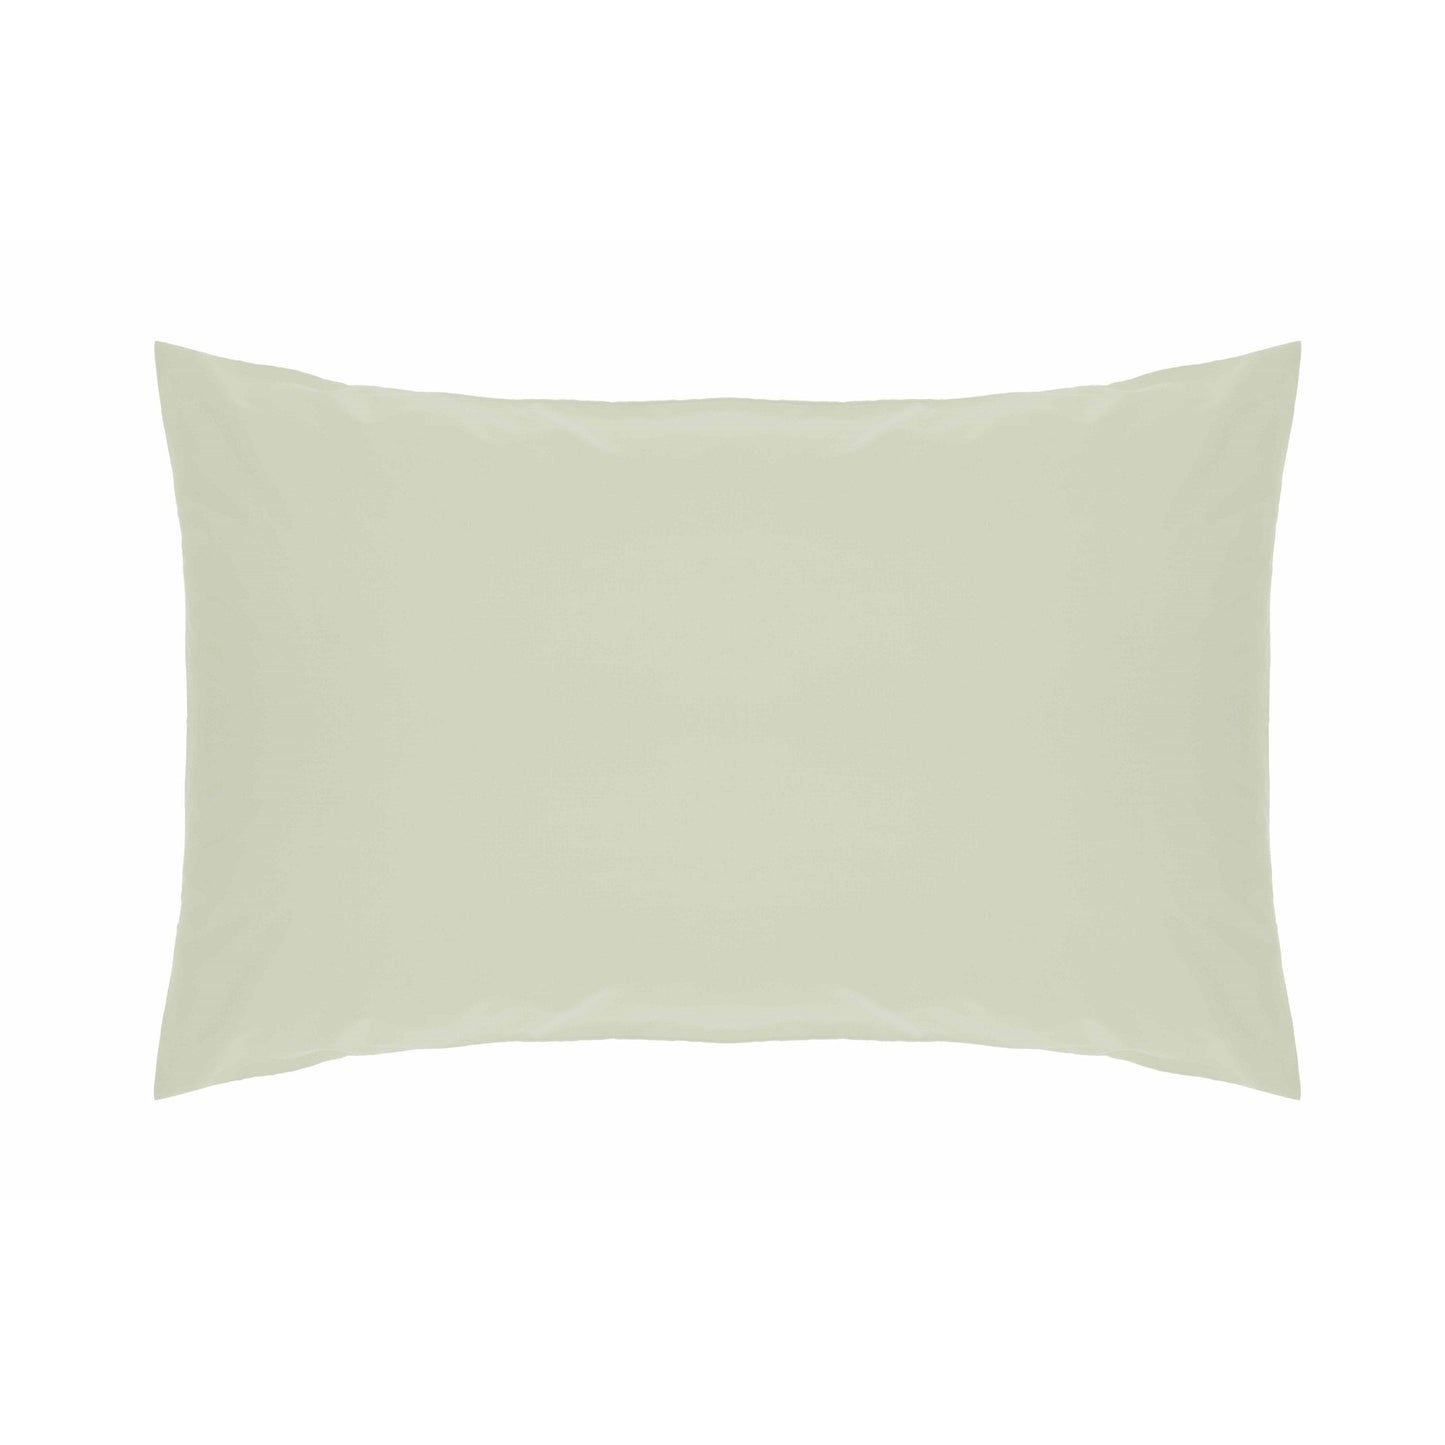 Belledorm-Housewife Pillowcase-Luxury Percale-200 Thread Count-Apple